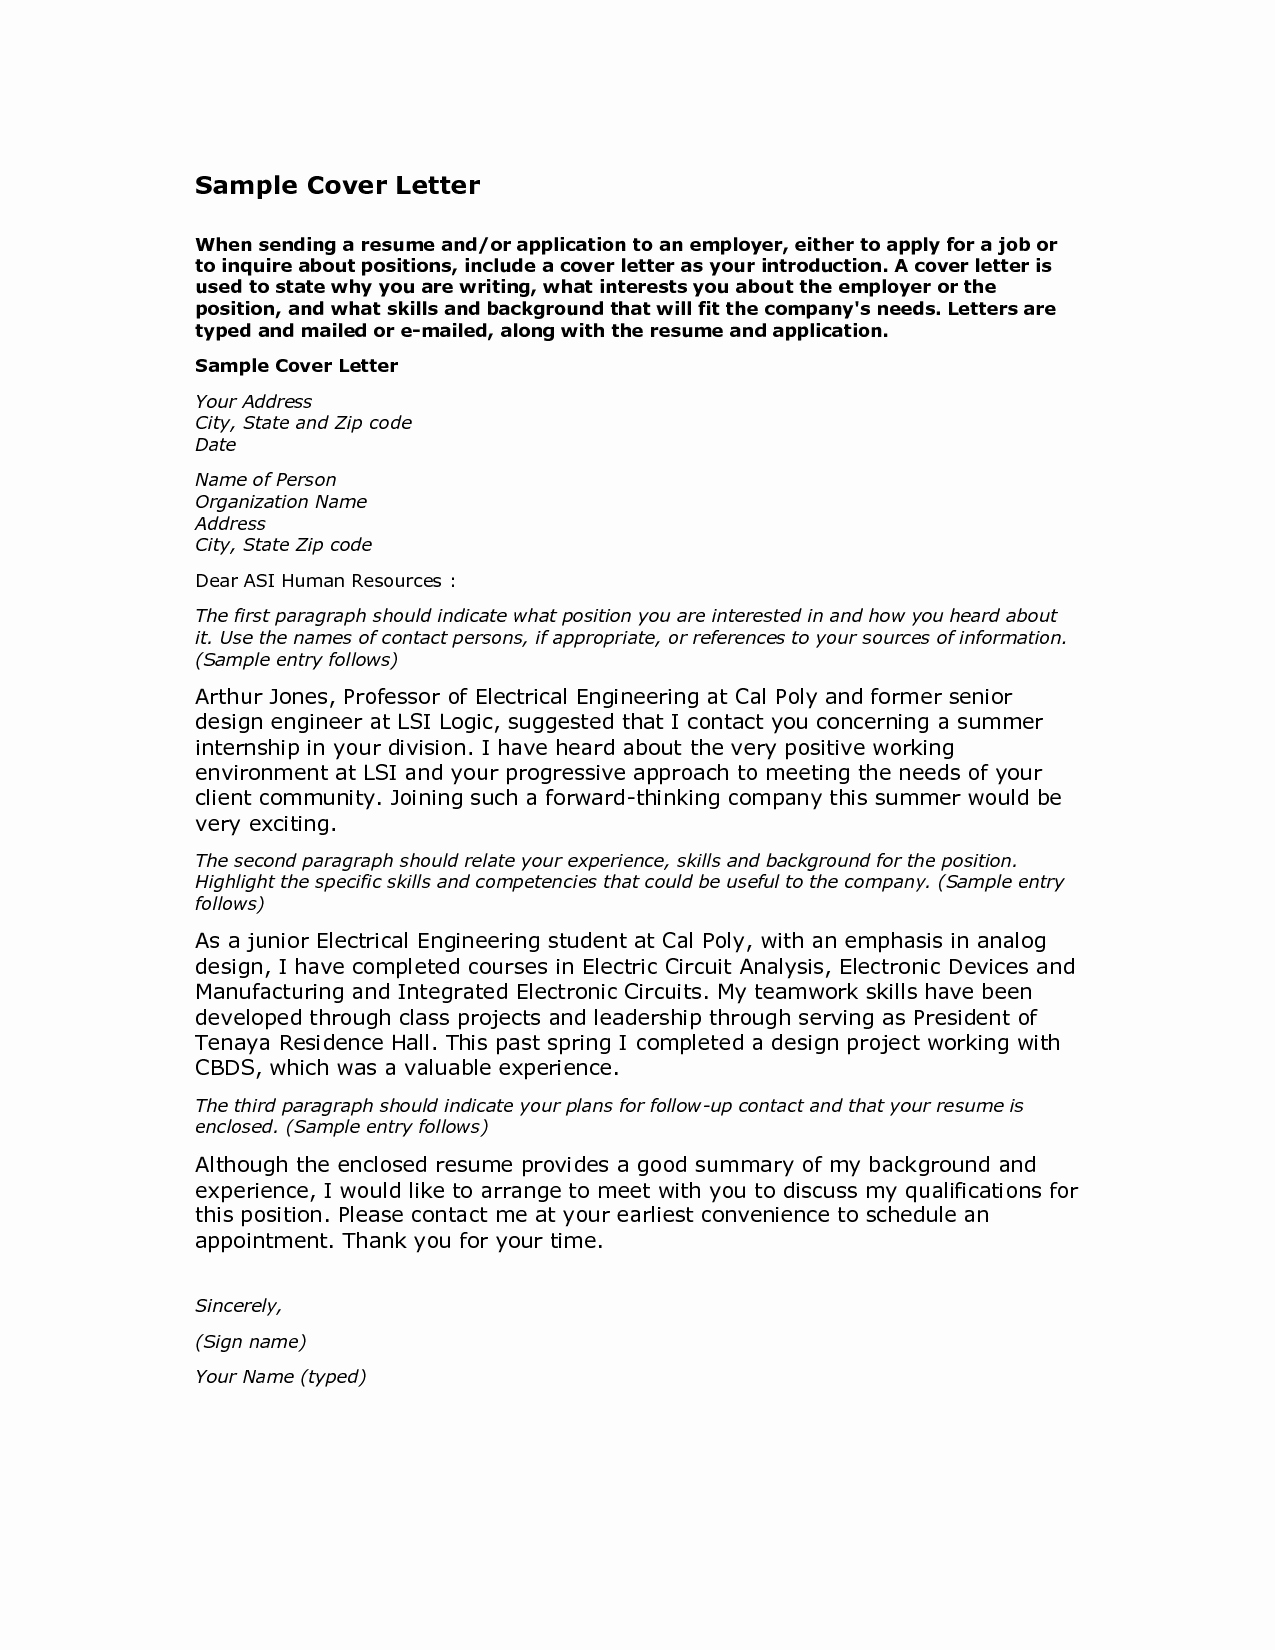 Letter Of Application Examples Lovely Cover Letter Sample Cover Letter for Job Application